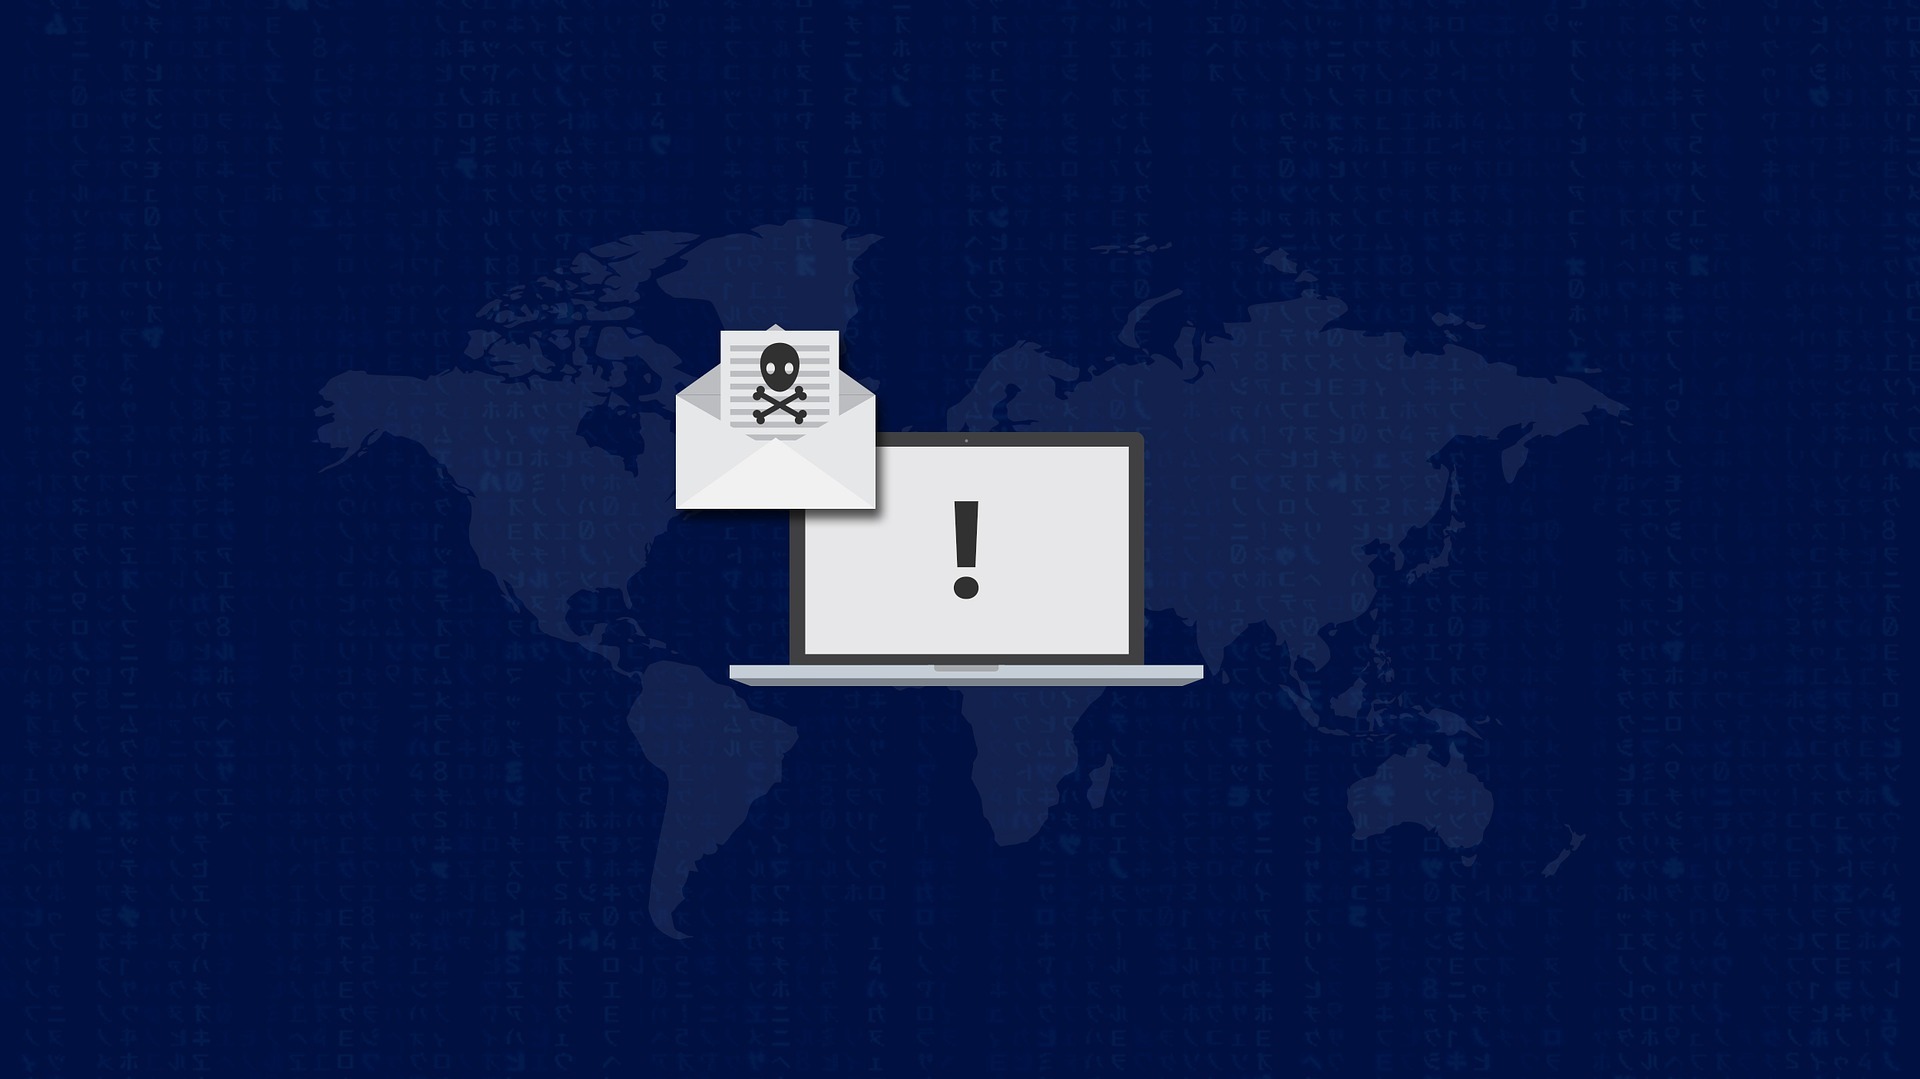 malware used runonly avoid detection five